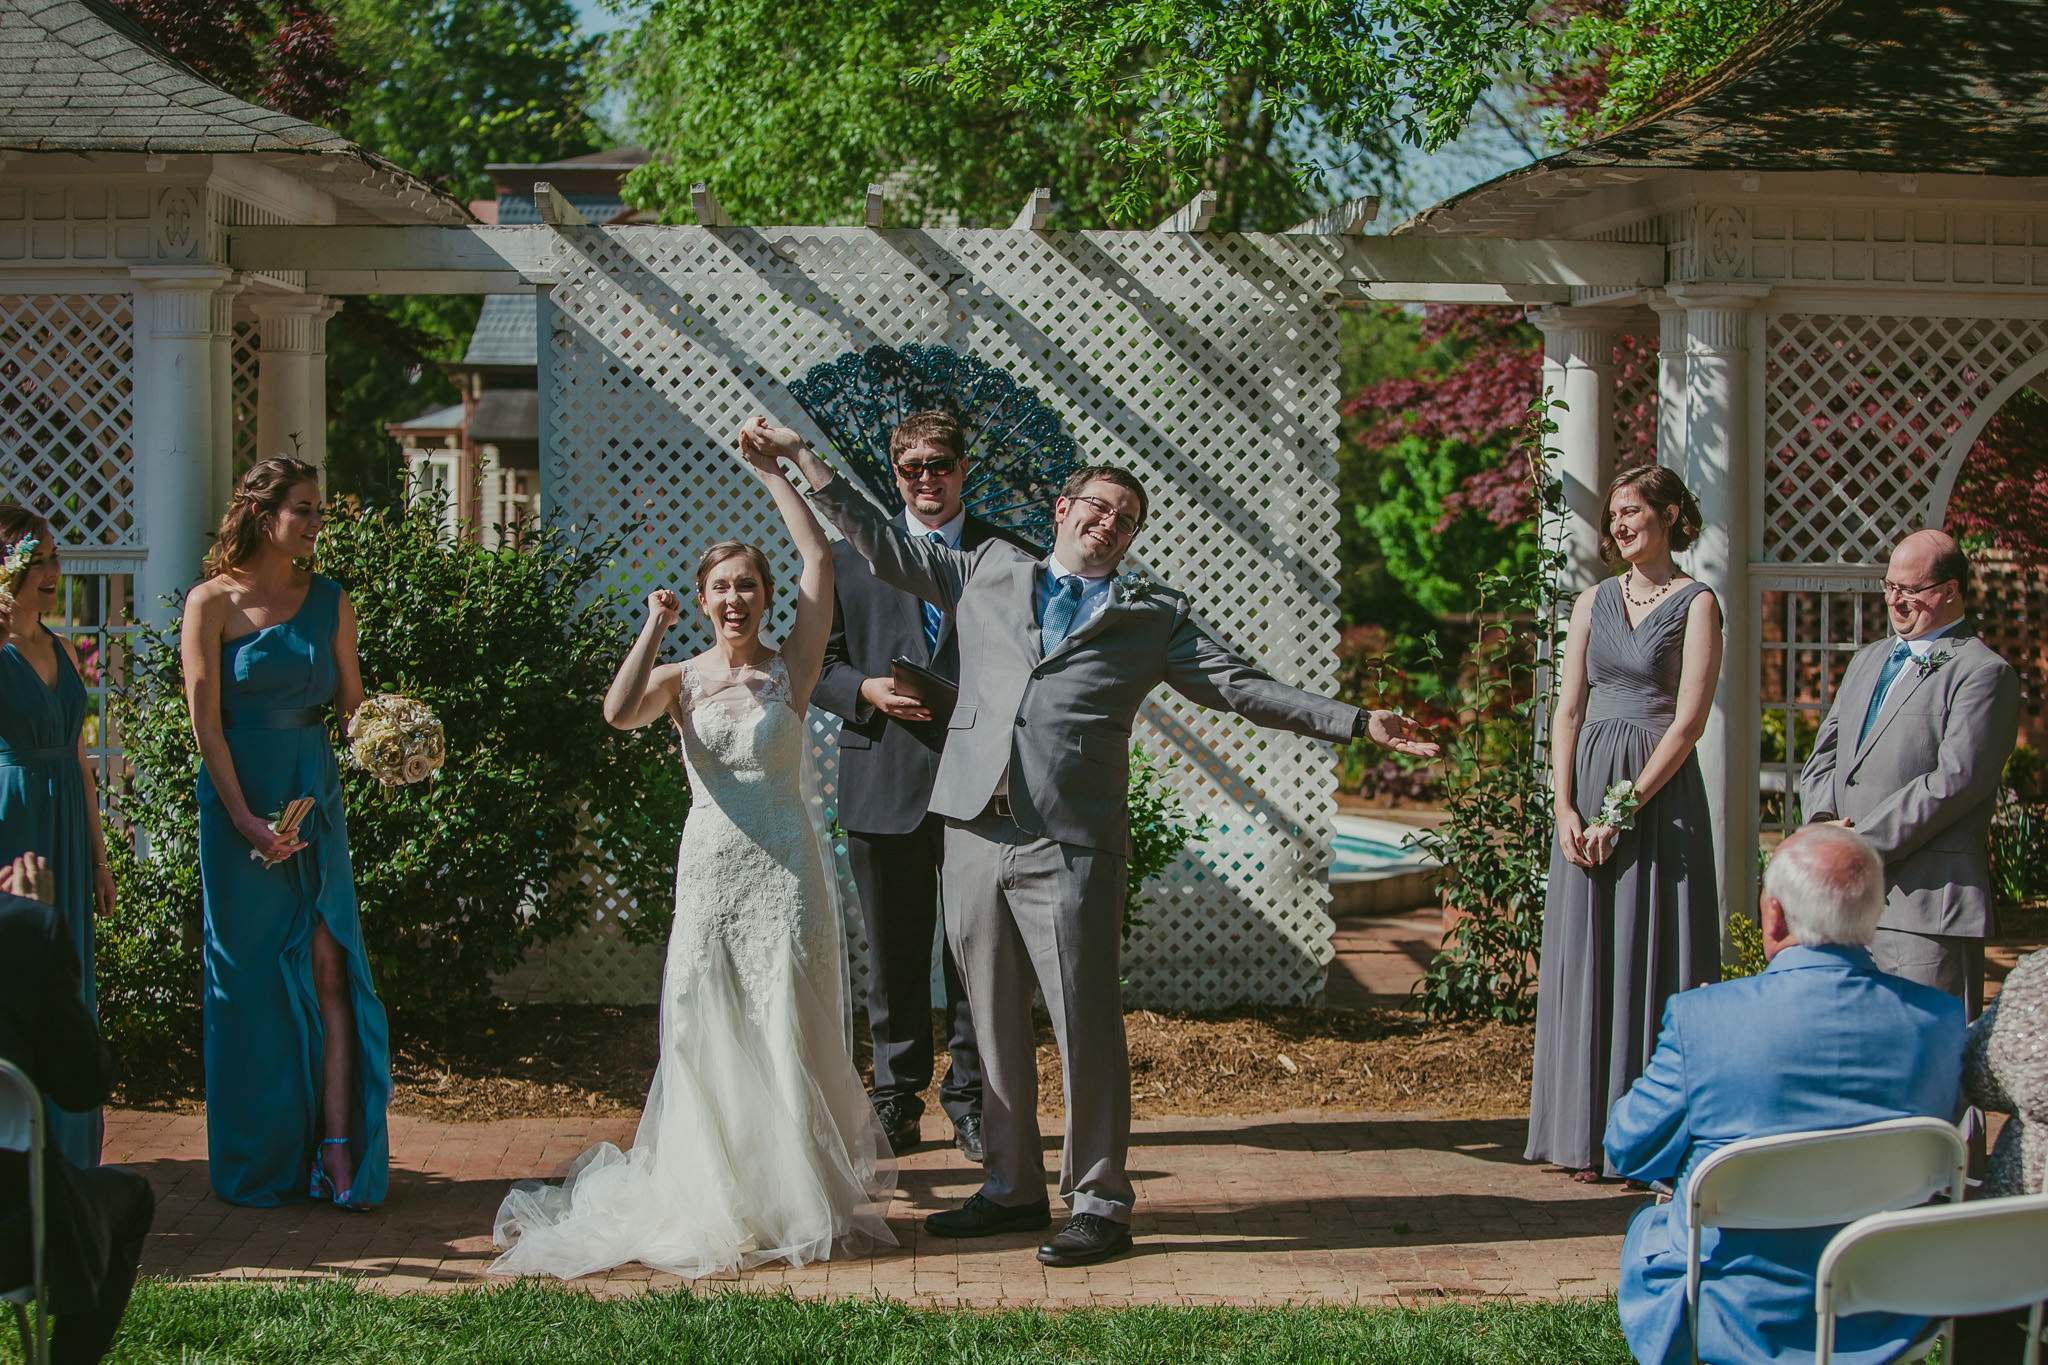 The bride and groom rejoice as their wedding ceremony ends at the Shuford House in Hickory, NC